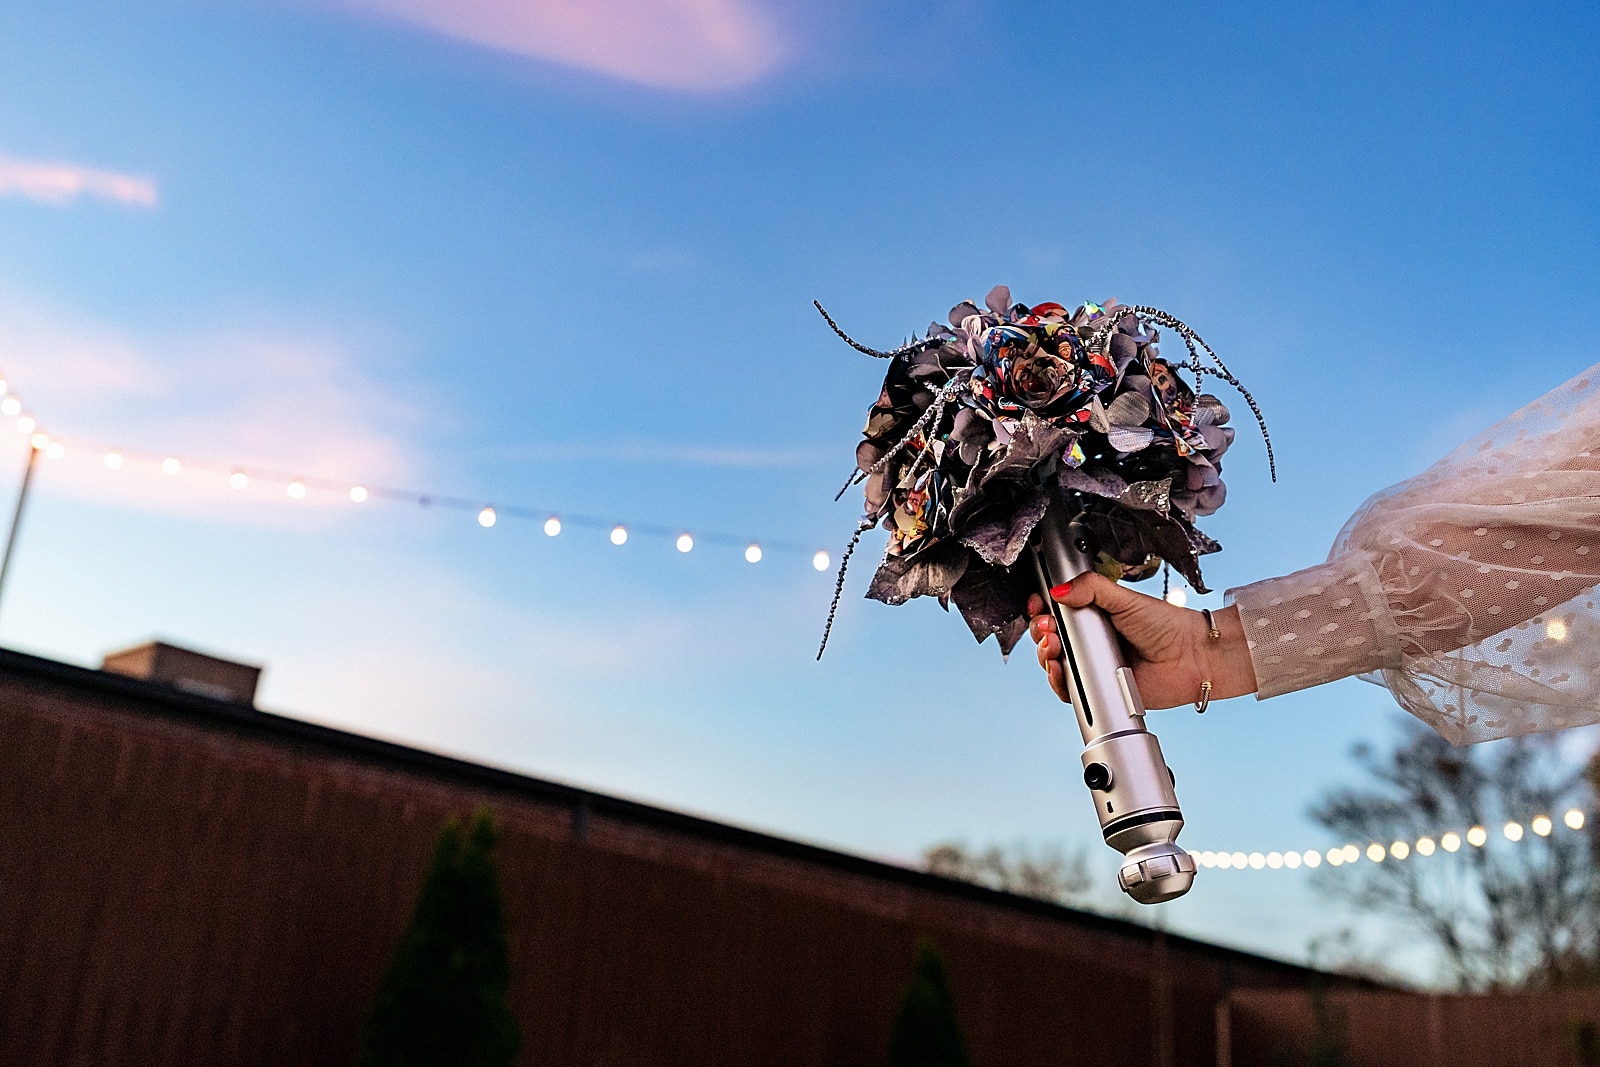 This bride's bouquet had a lightsaber hilt and origami flowers made of comic book pages